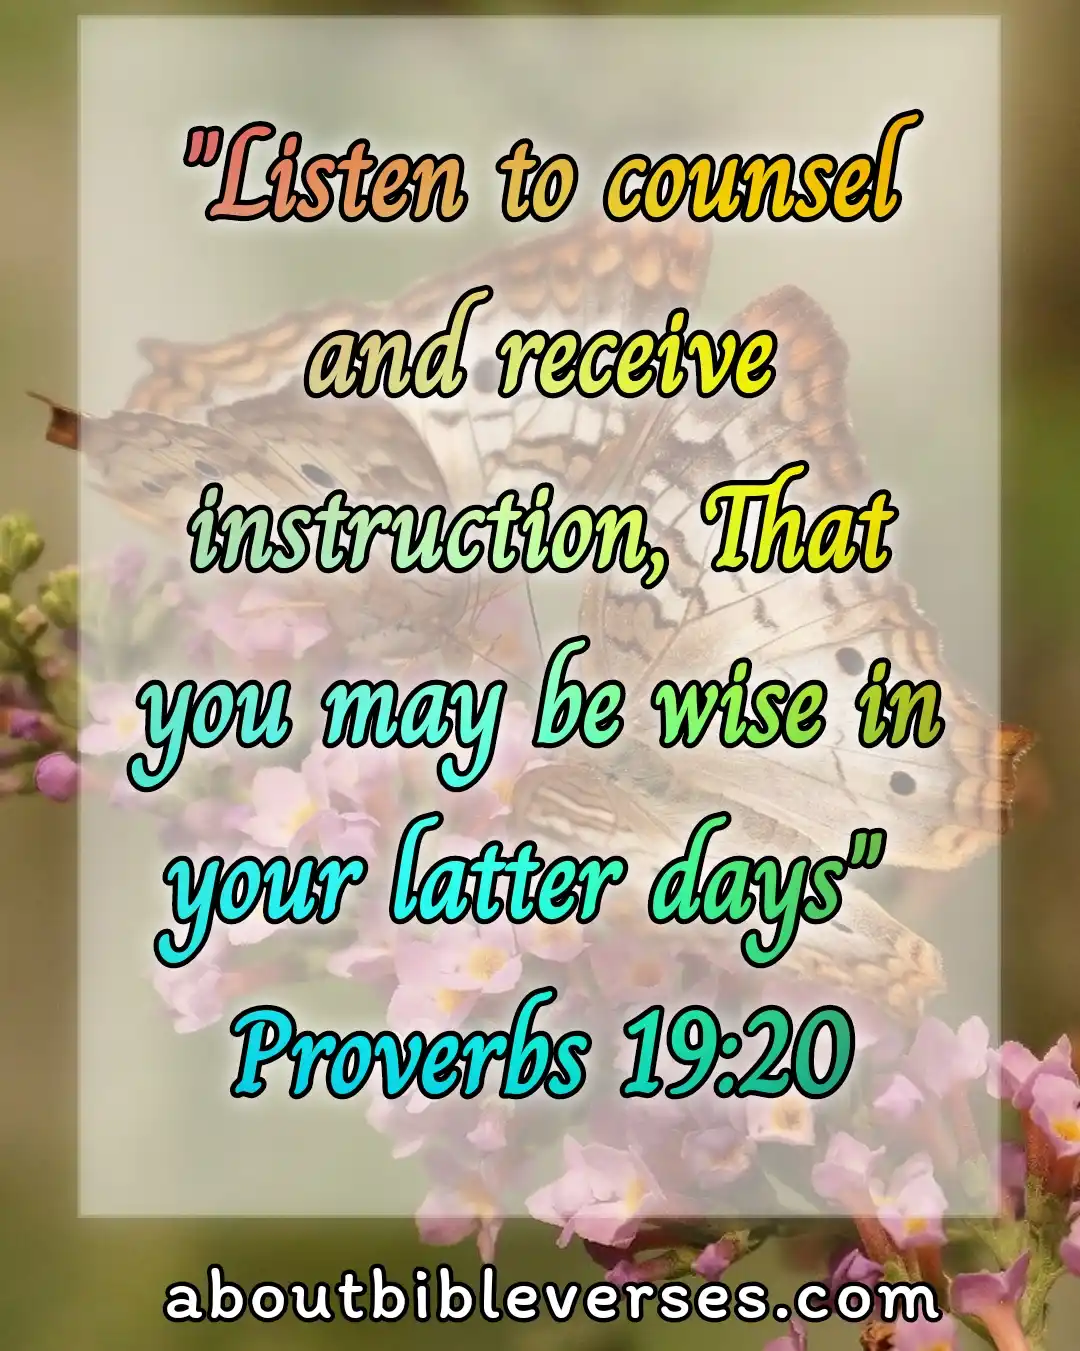 Bible Verses About Age And Wisdom (Proverbs 19:20)